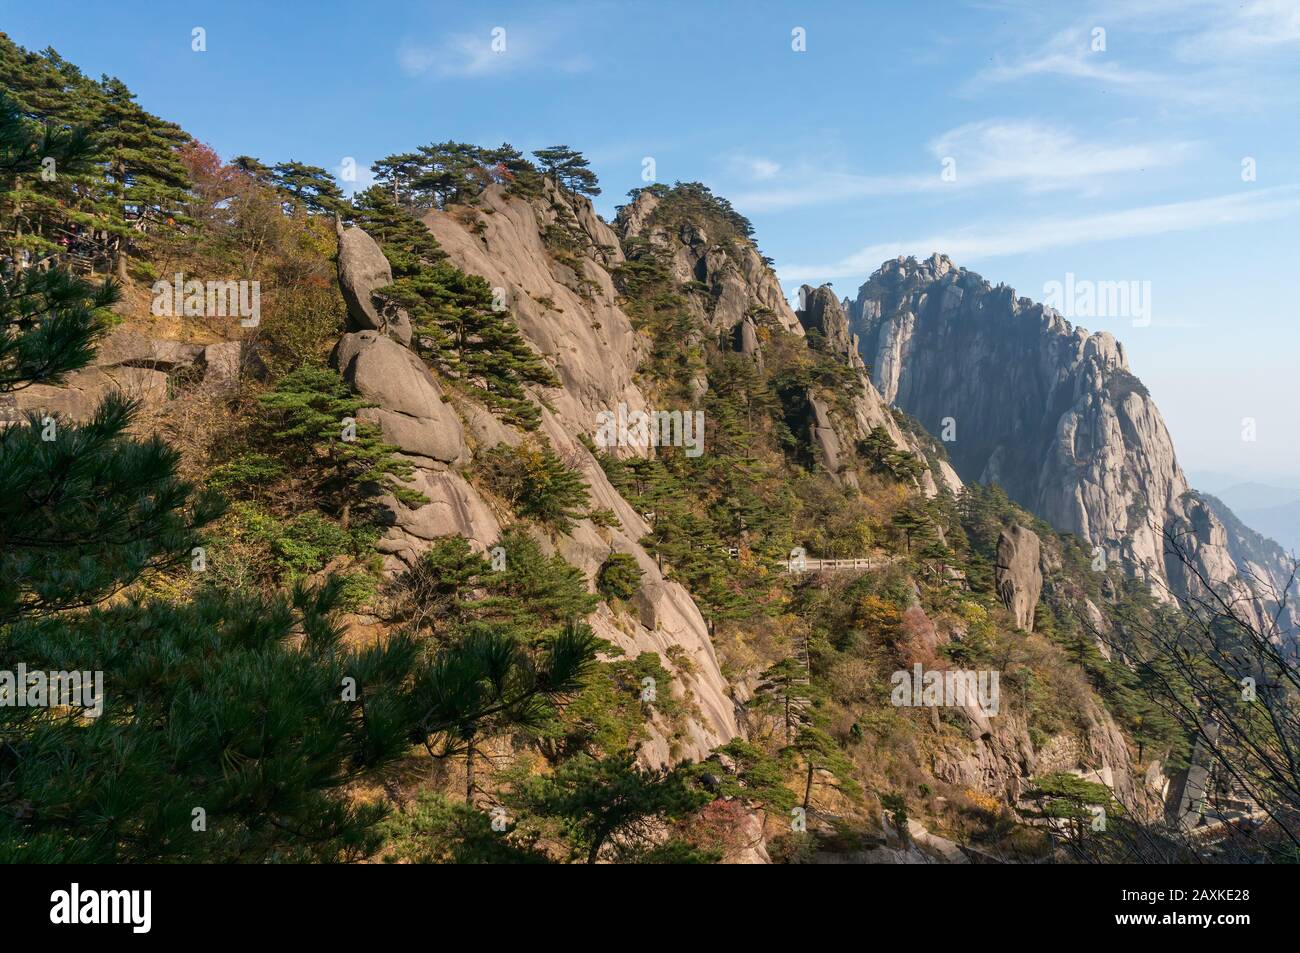 Oddly-shaped rocks on a foggy day during spring time. Landscape of the Huangshan Mountain in China Stock Photo